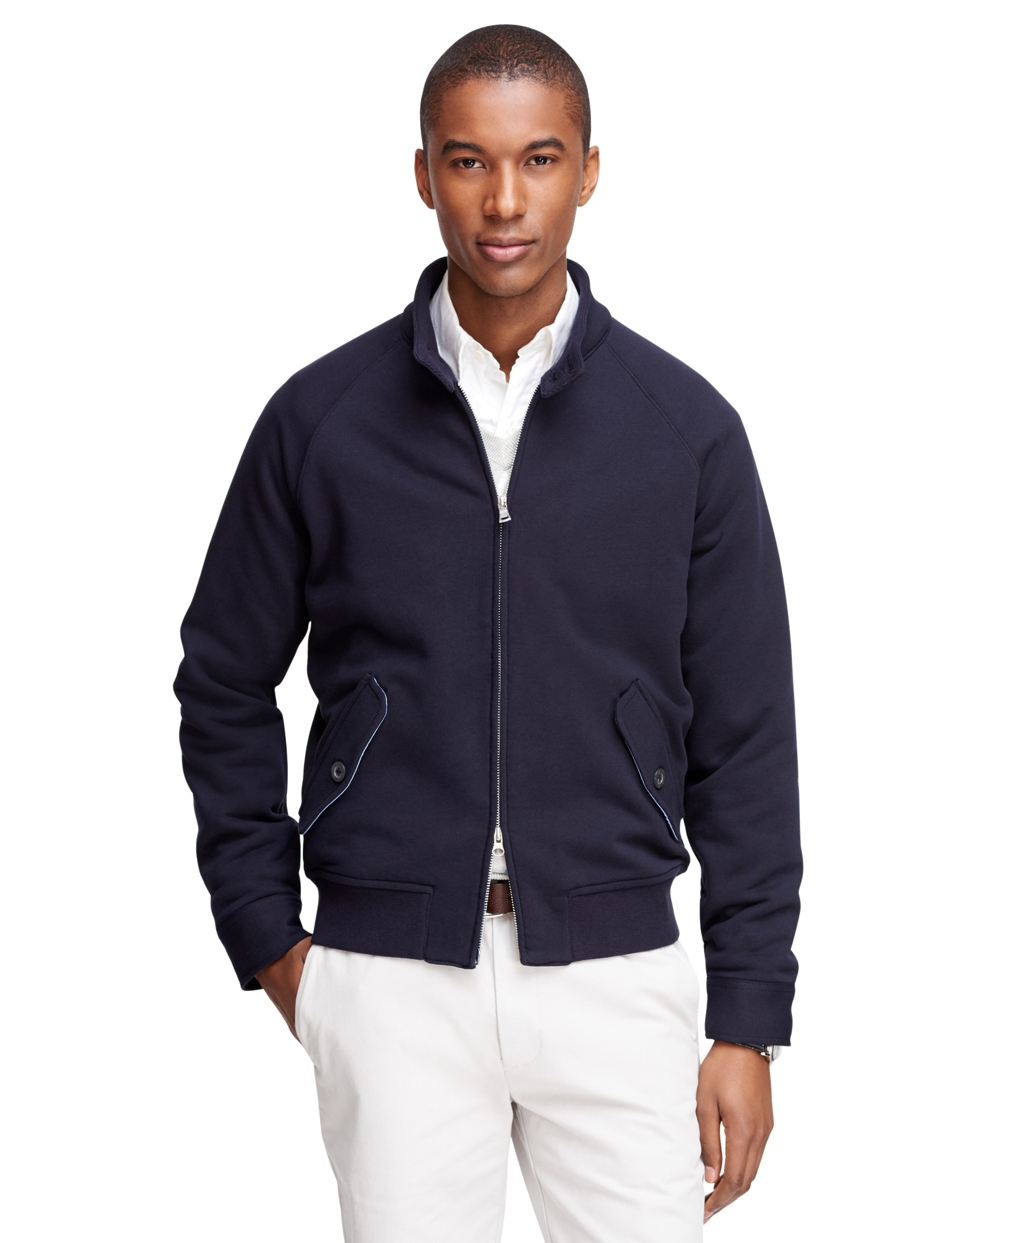 Lyst - Brooks Brothers Knit Jacket in Blue for Men